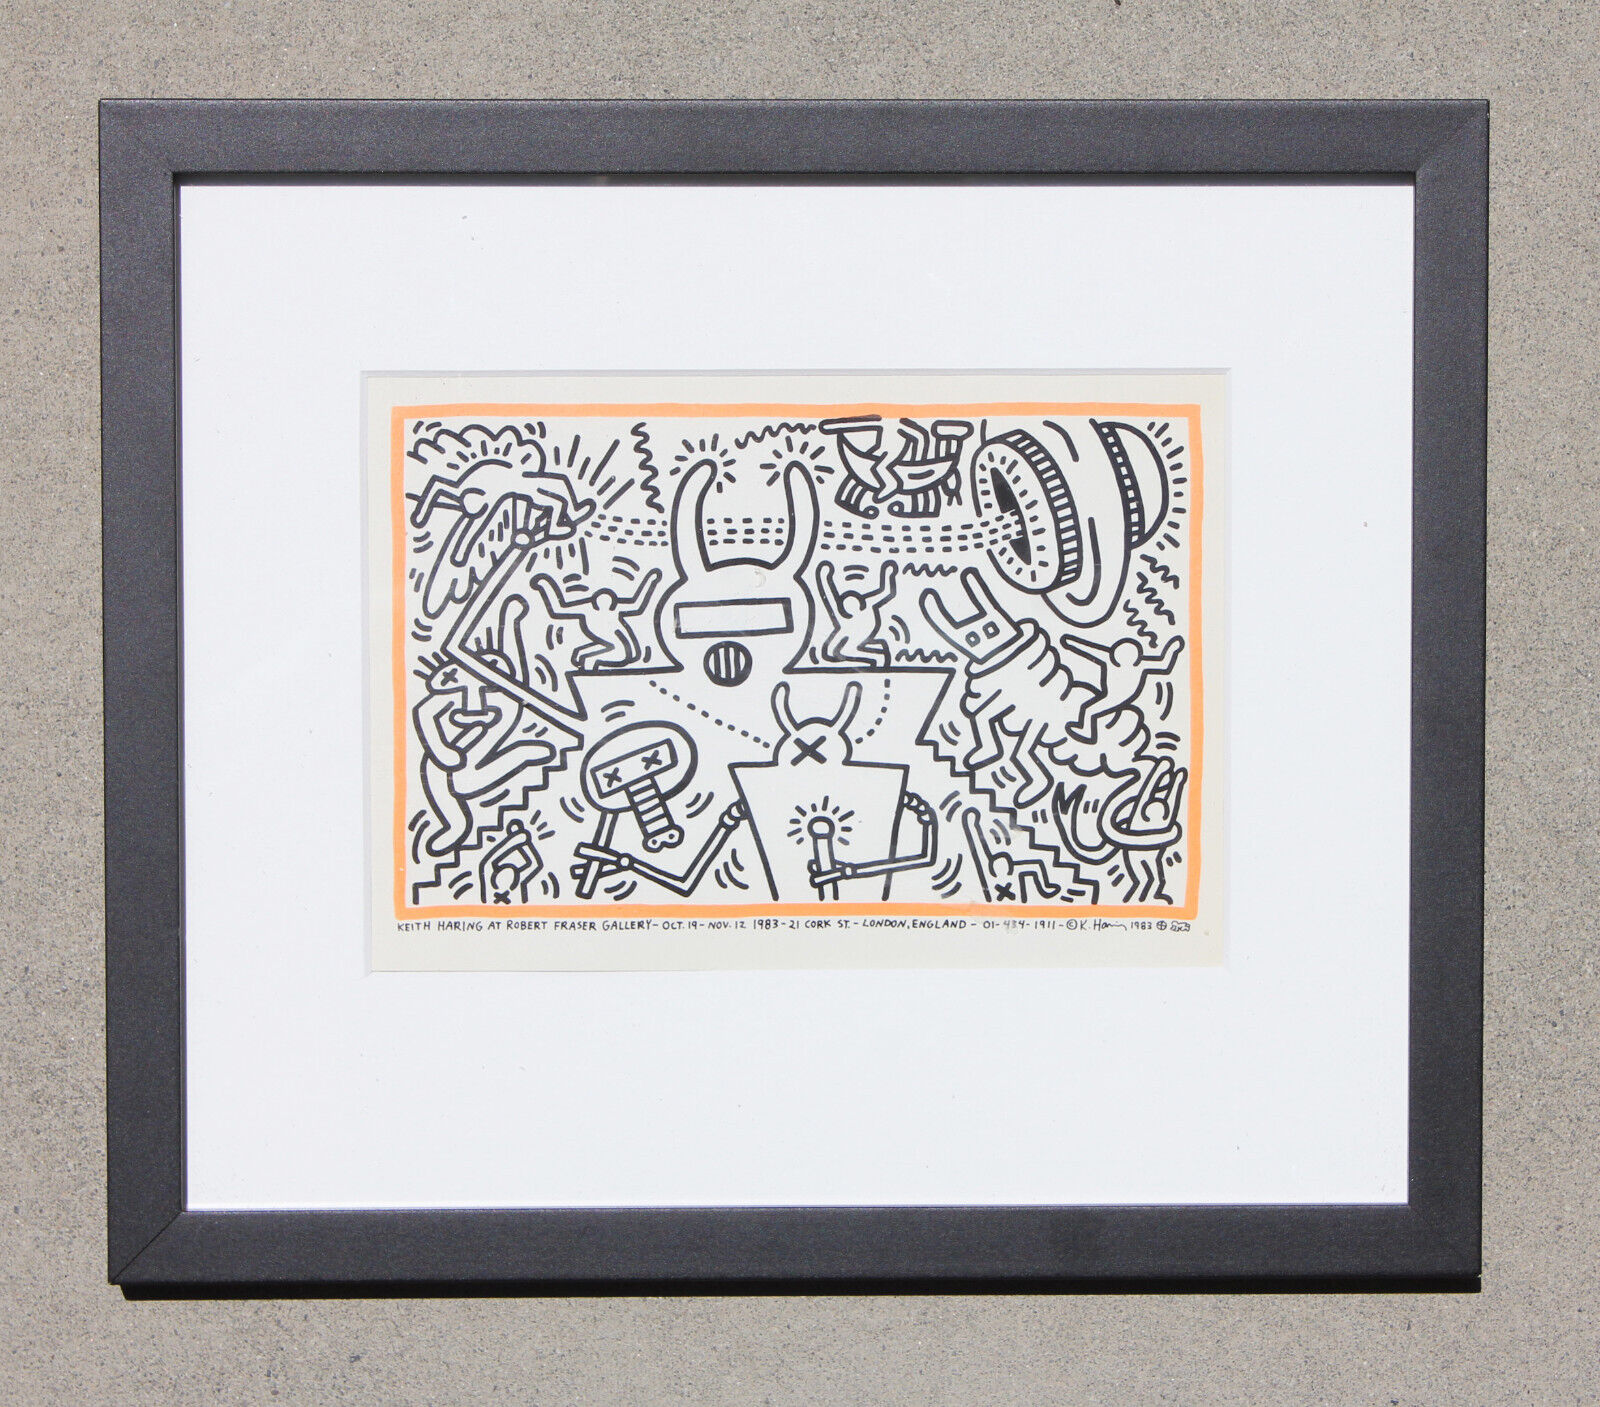 Original Keith HARING Lithograph Art Work Framed, Hand Signed, Authentic, 1988